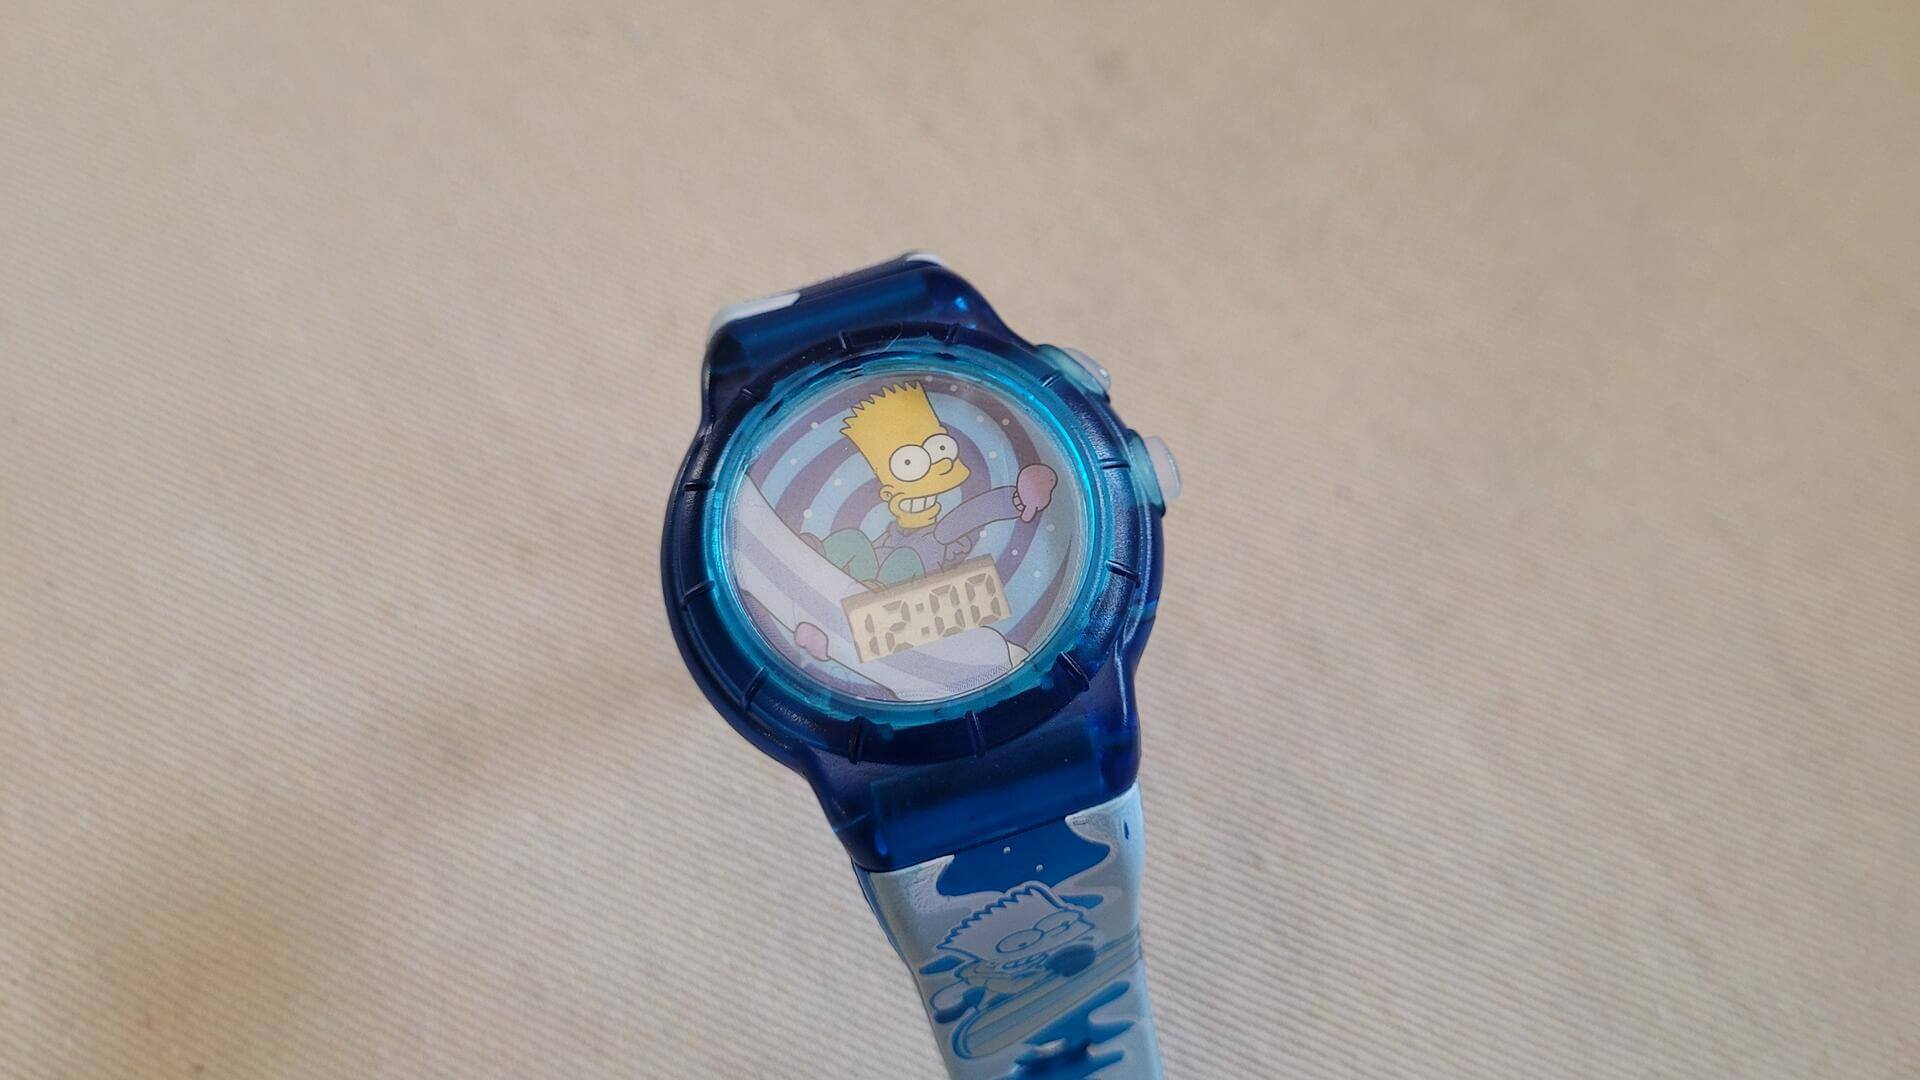 2002 Bart Simpsons "Cool Your Jets Man" talking watch. Awesome vintage Simpsons and Burger King nostalgia collectible, working with the brand new battery, one of four different Simpsons talking watches released as promotional kids meal swag.